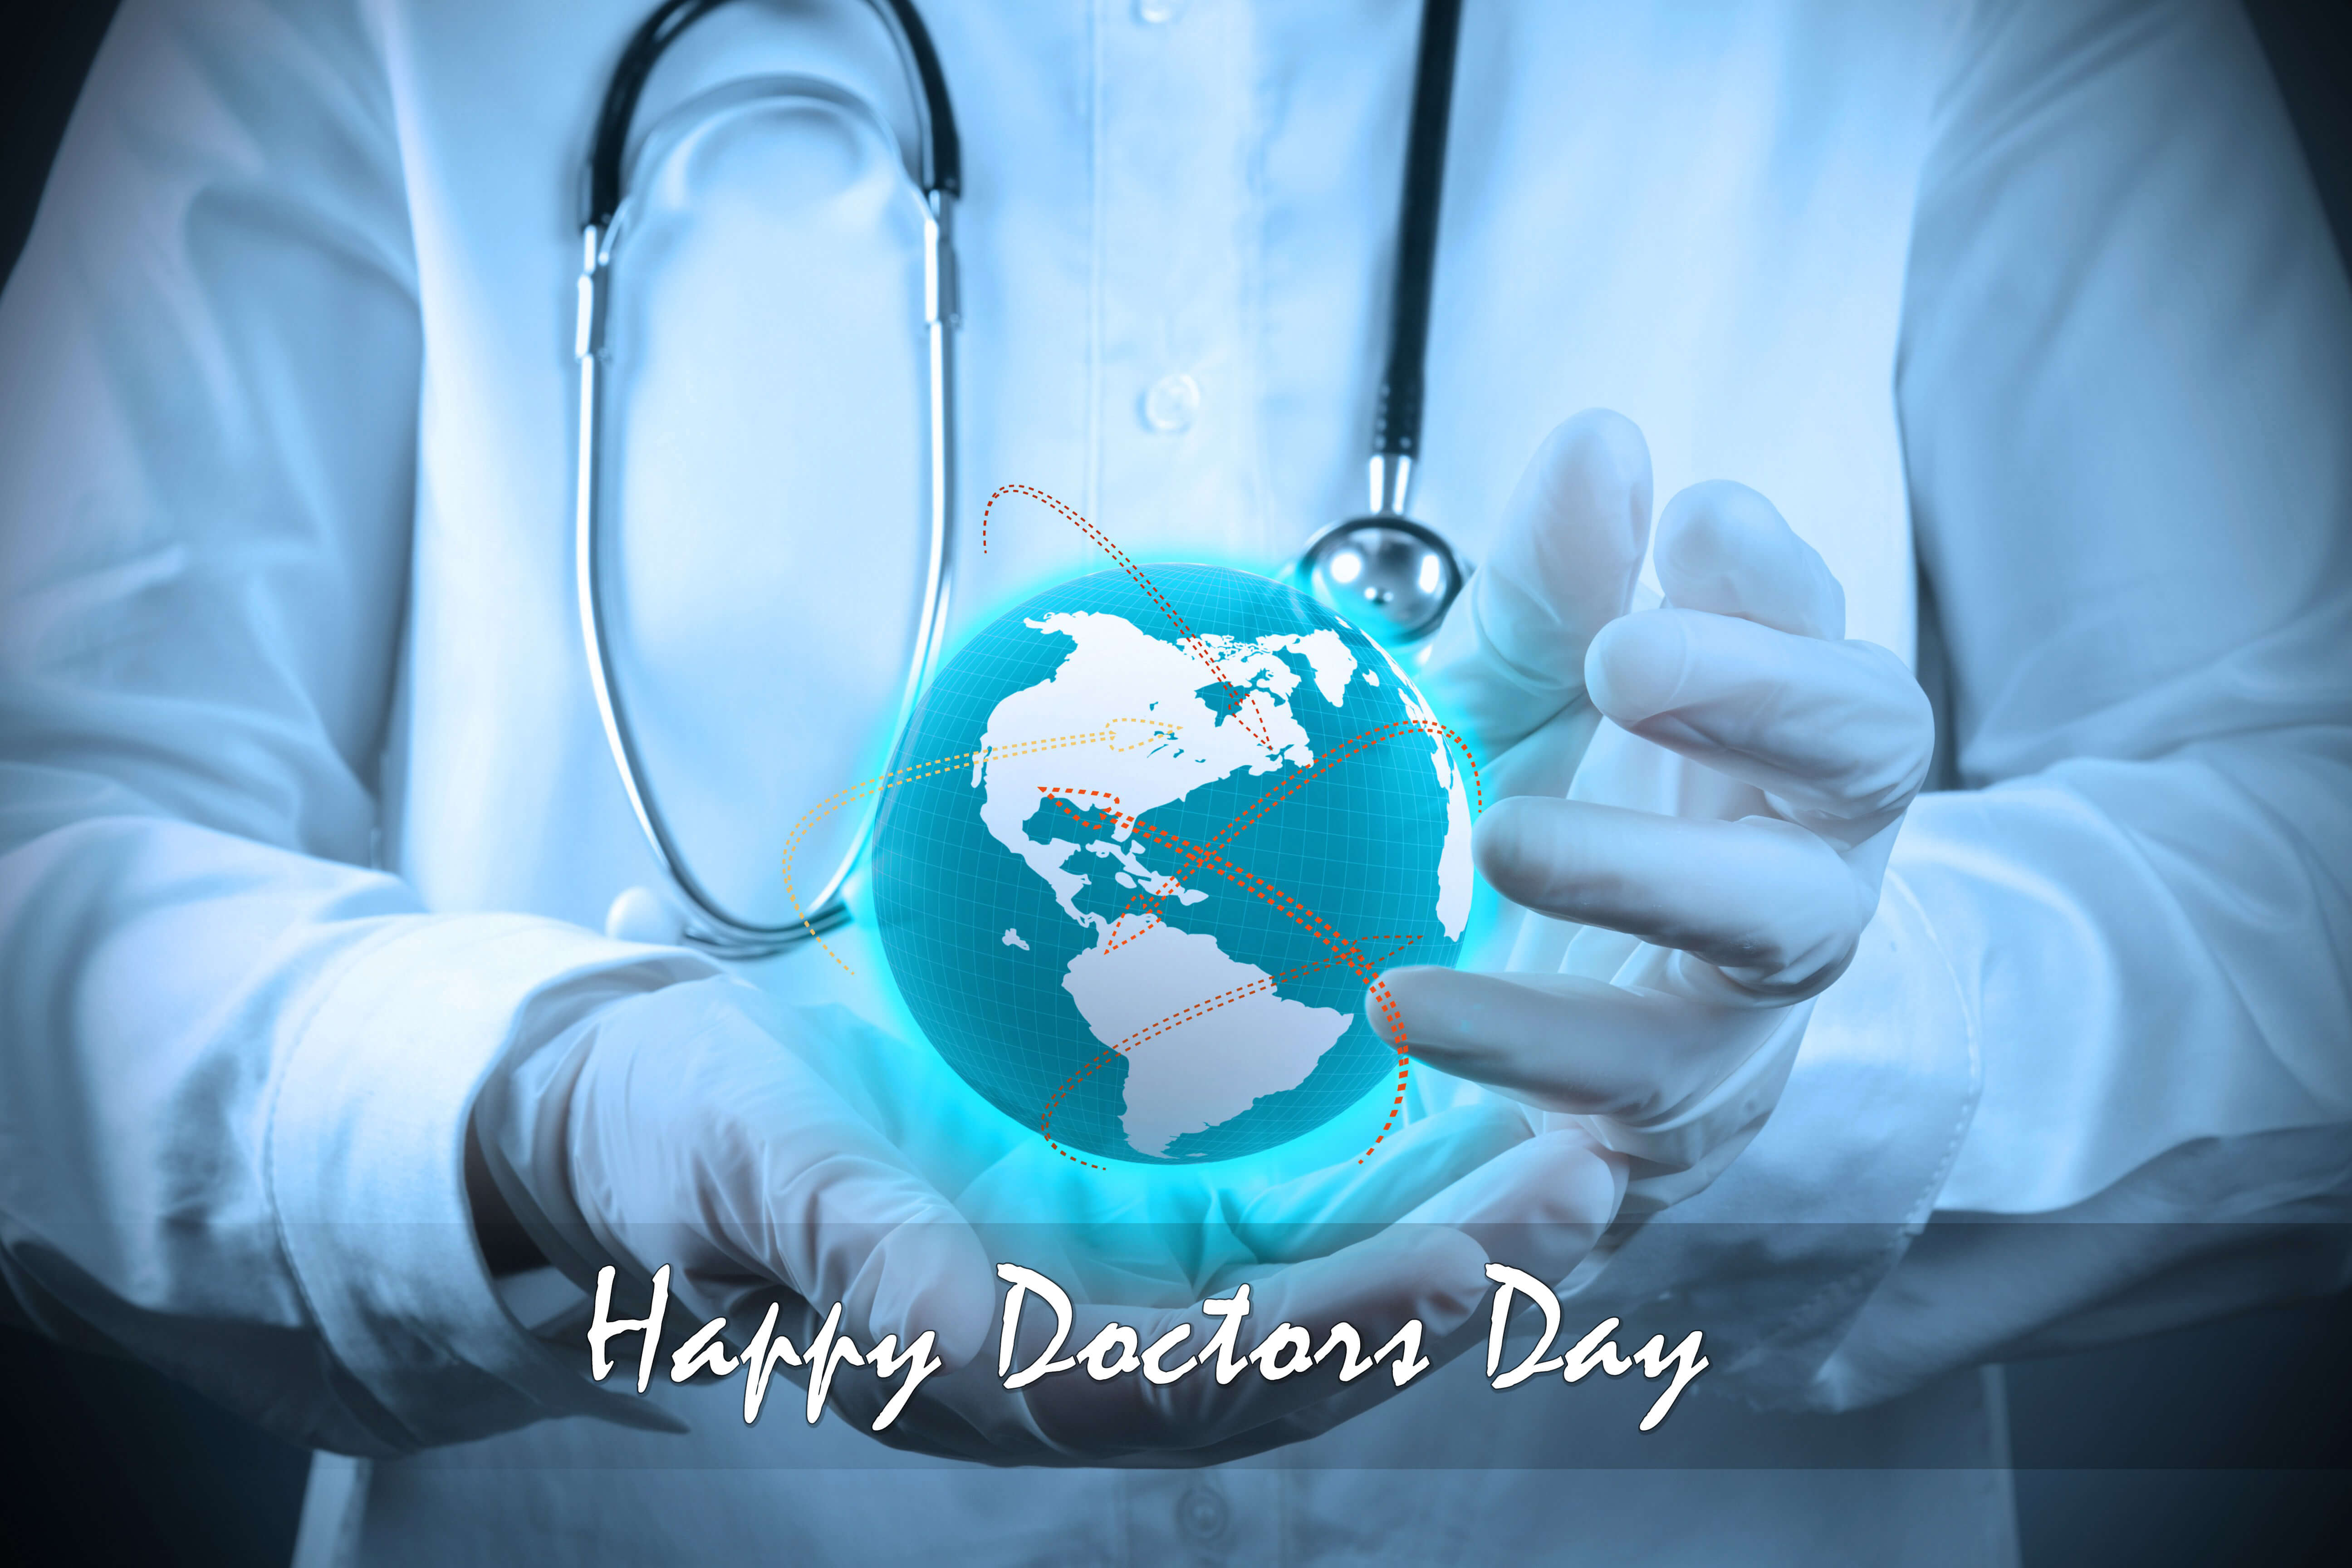 Happy Doctors Day Wishes Greetings Symbol Hd Wallpaper Images